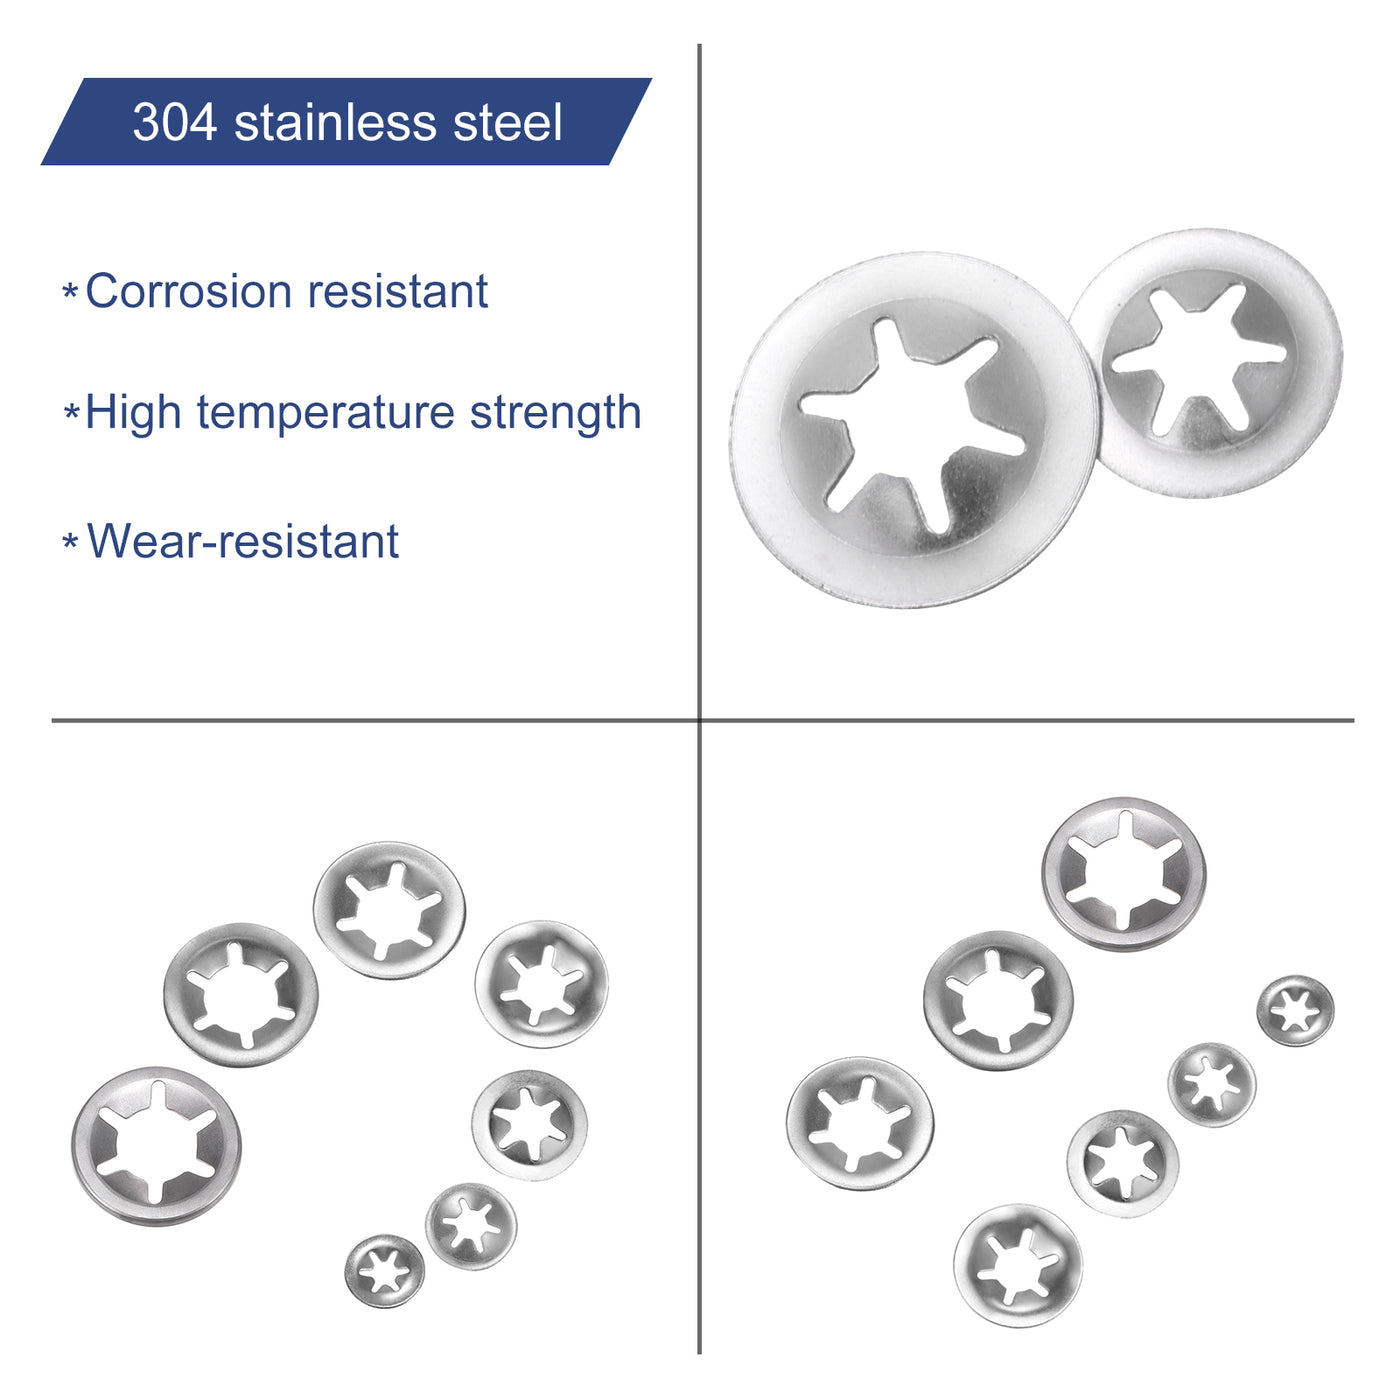 uxcell Uxcell 180pcs Internal Tooth Star Lock Washers M3 M4 M5 M6 M8 M10 M12, Stainless Steel